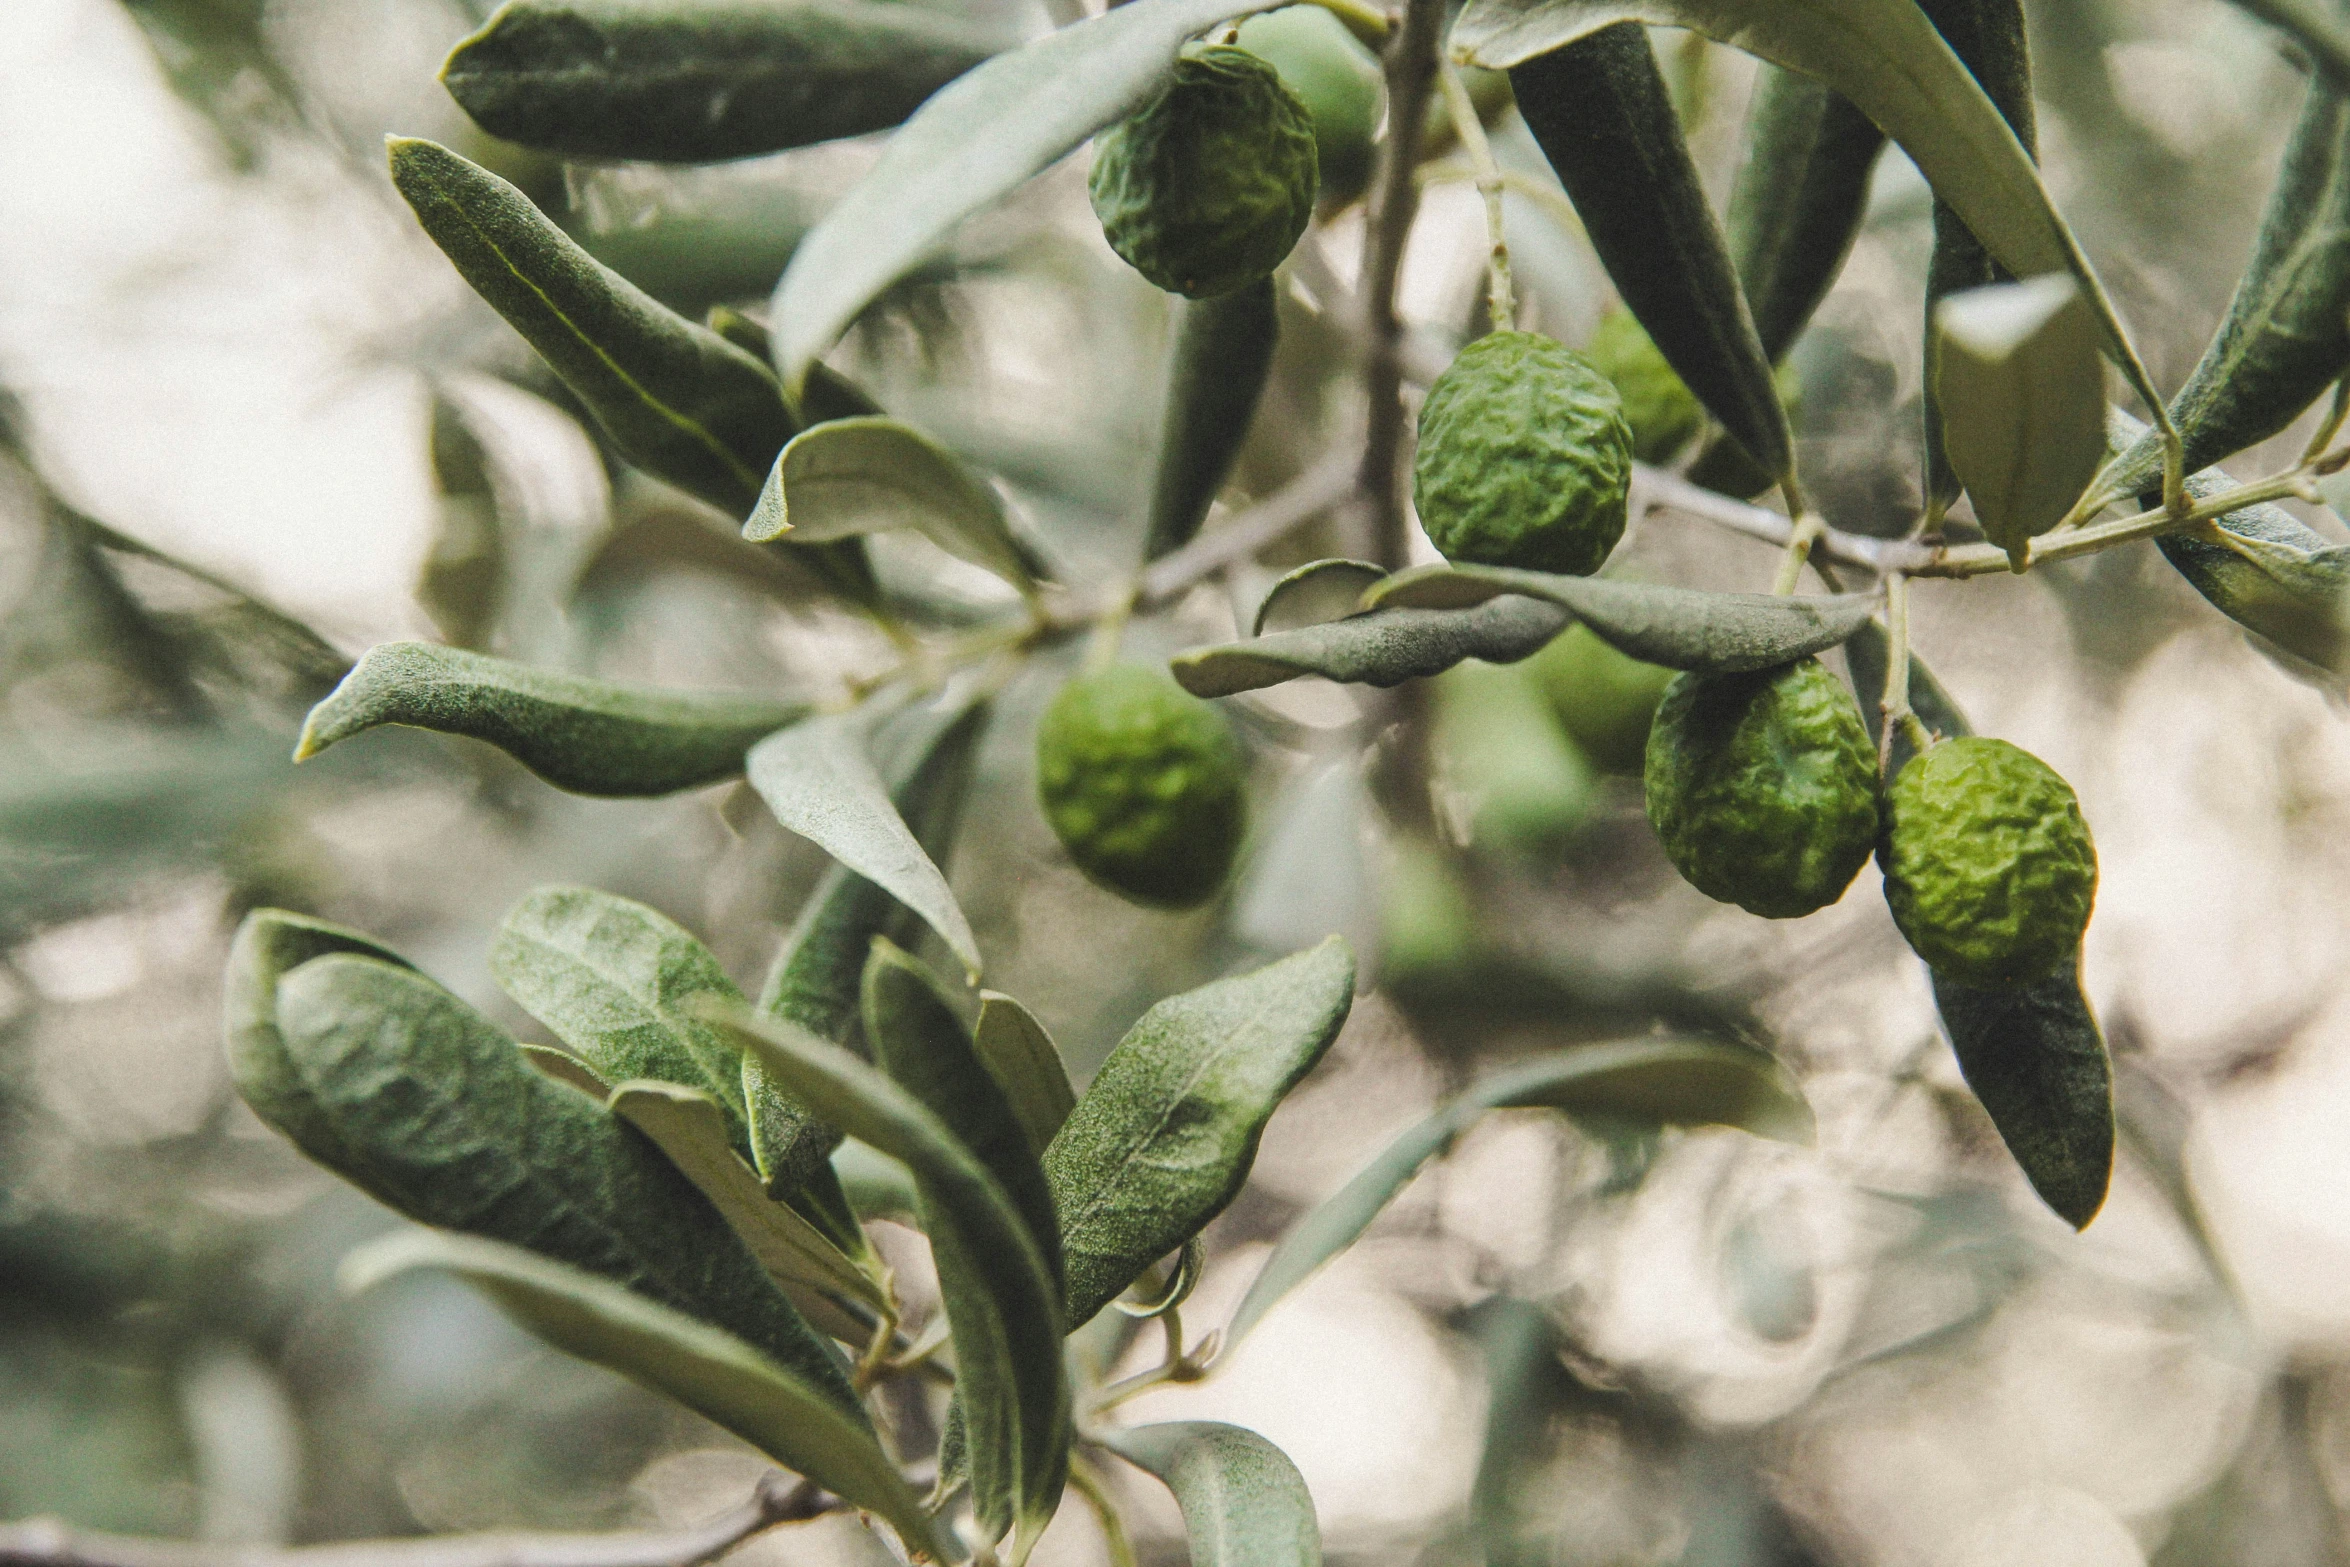 green olives are hanging on the tree